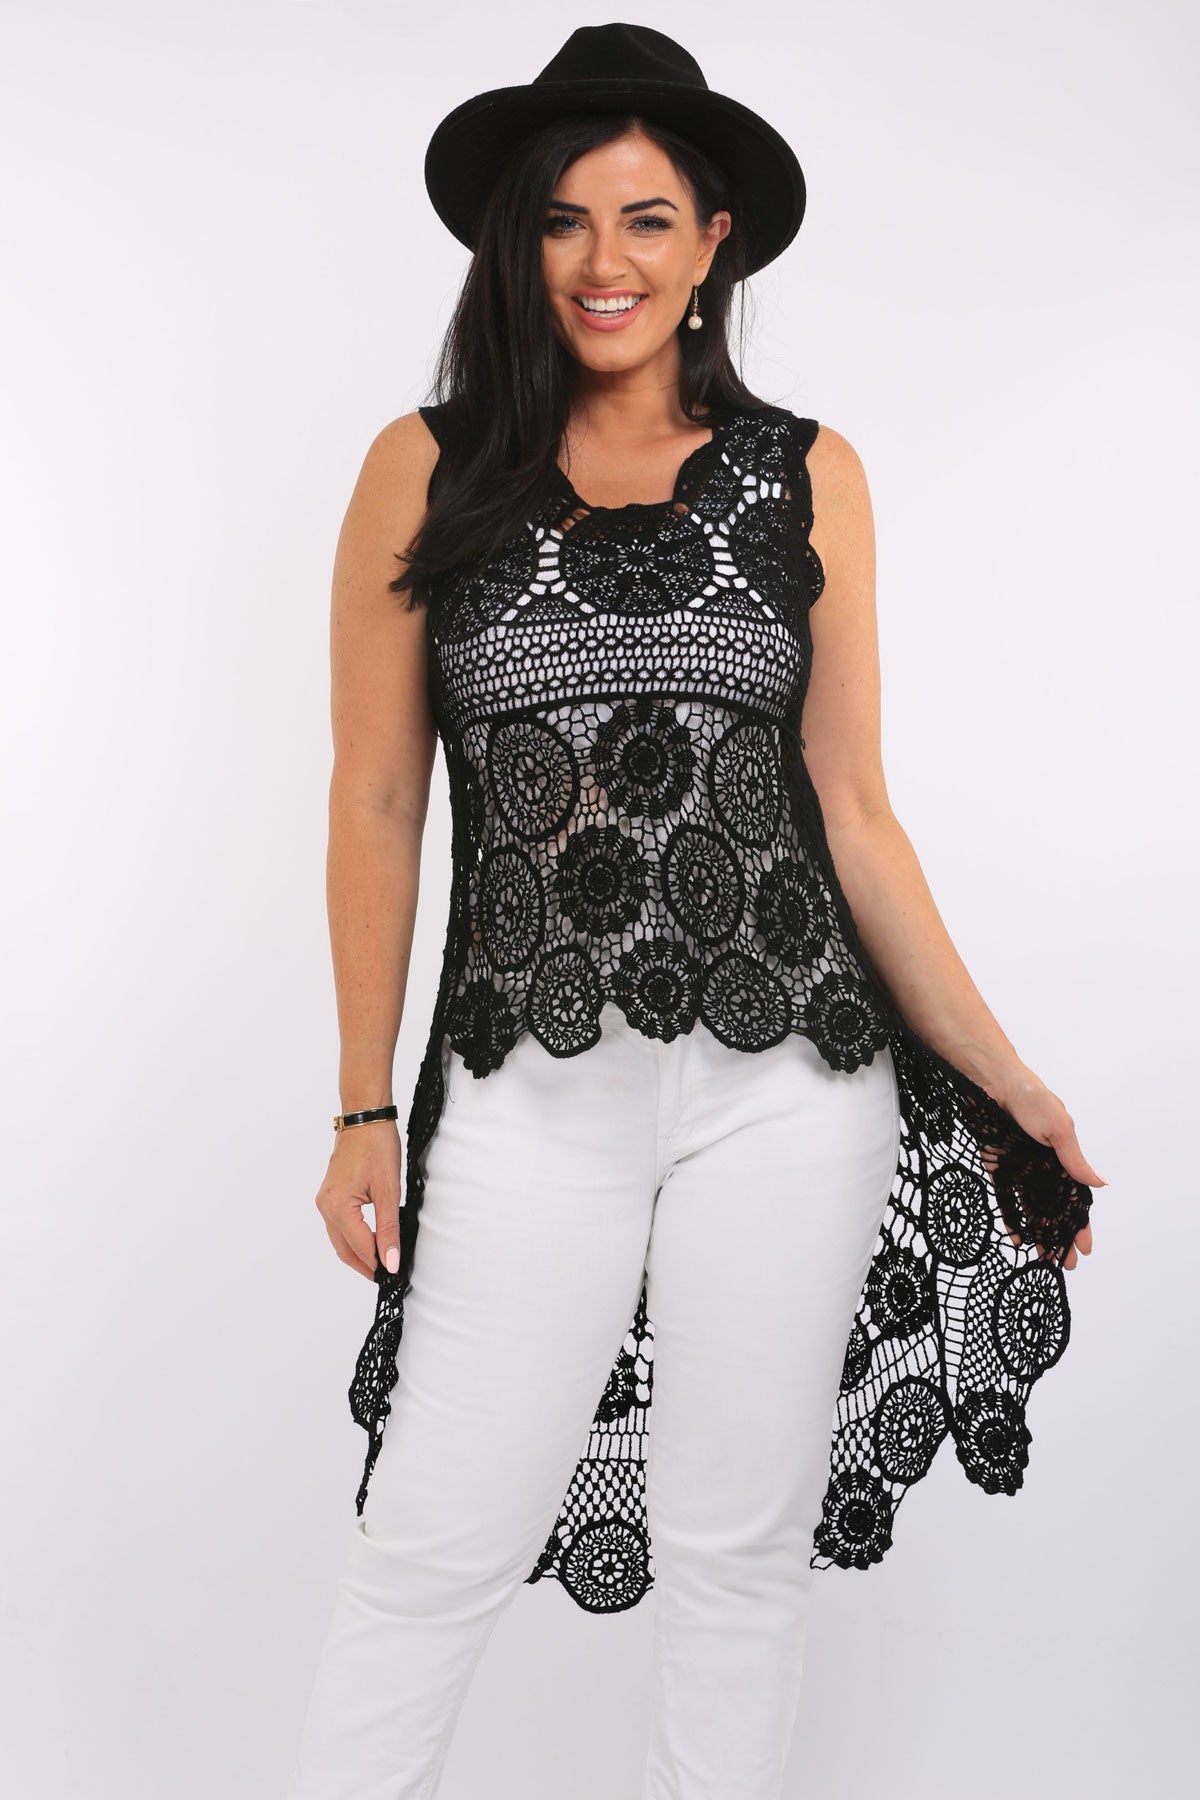 Stay stylish and comfortable in our black lace cotton hilo hem tunic. Perfect for any occasion, this elegant piece is a must-have. Shop now!